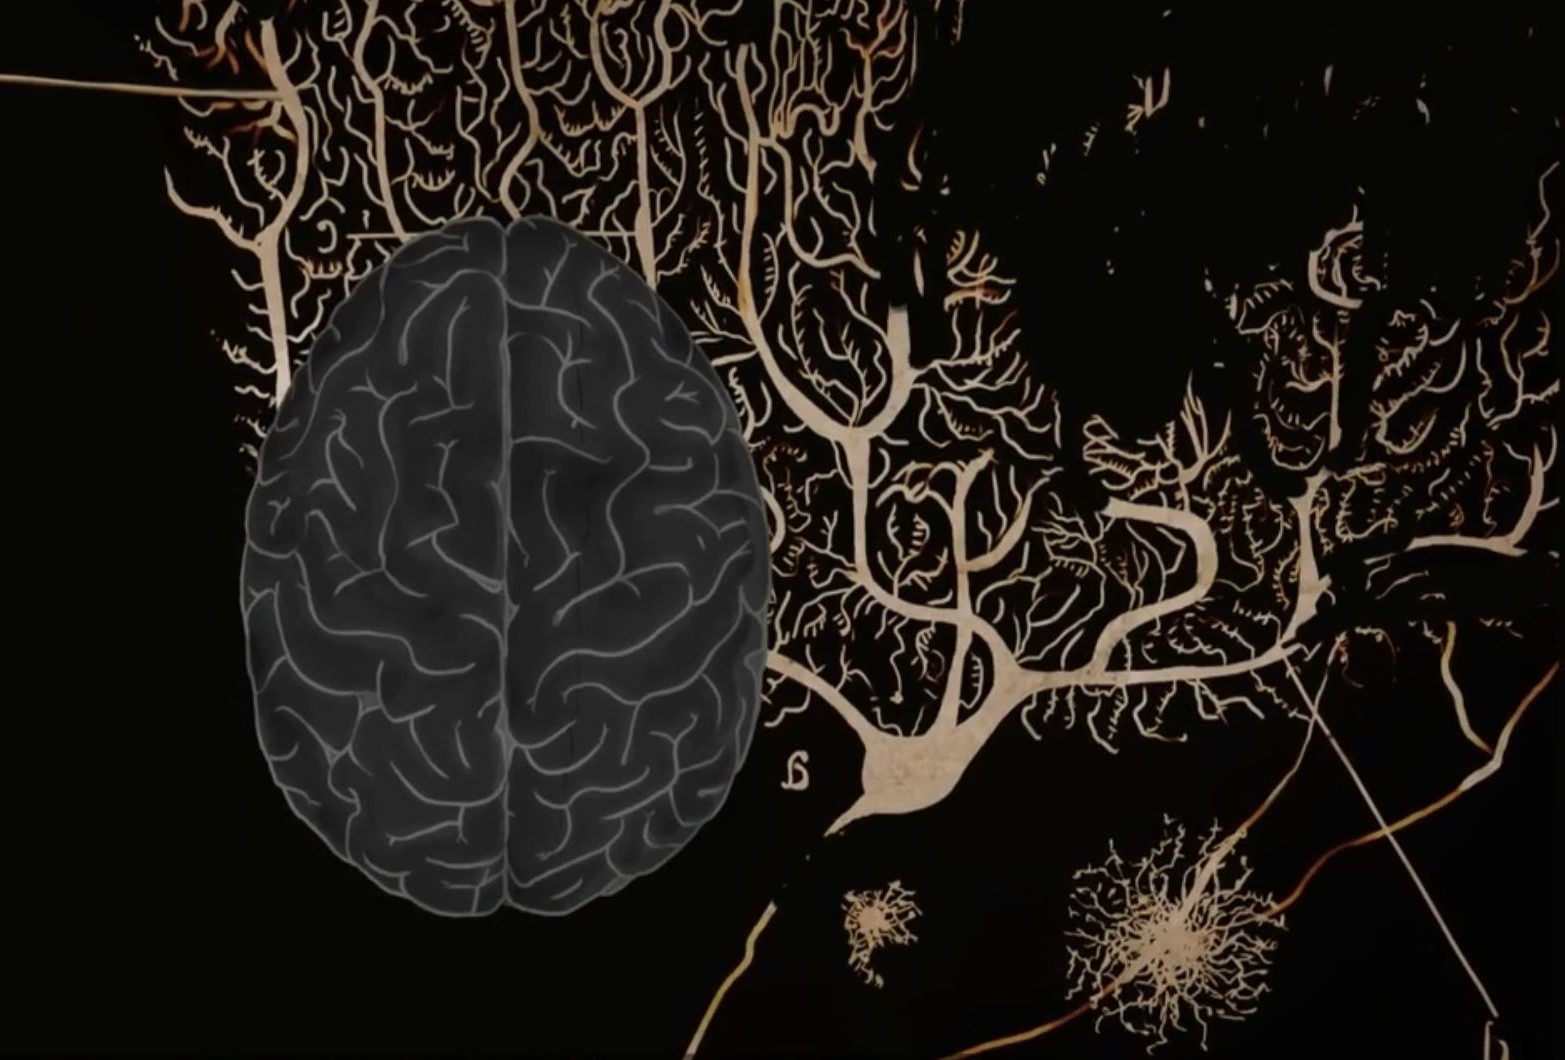 Sketch of brain and neurons